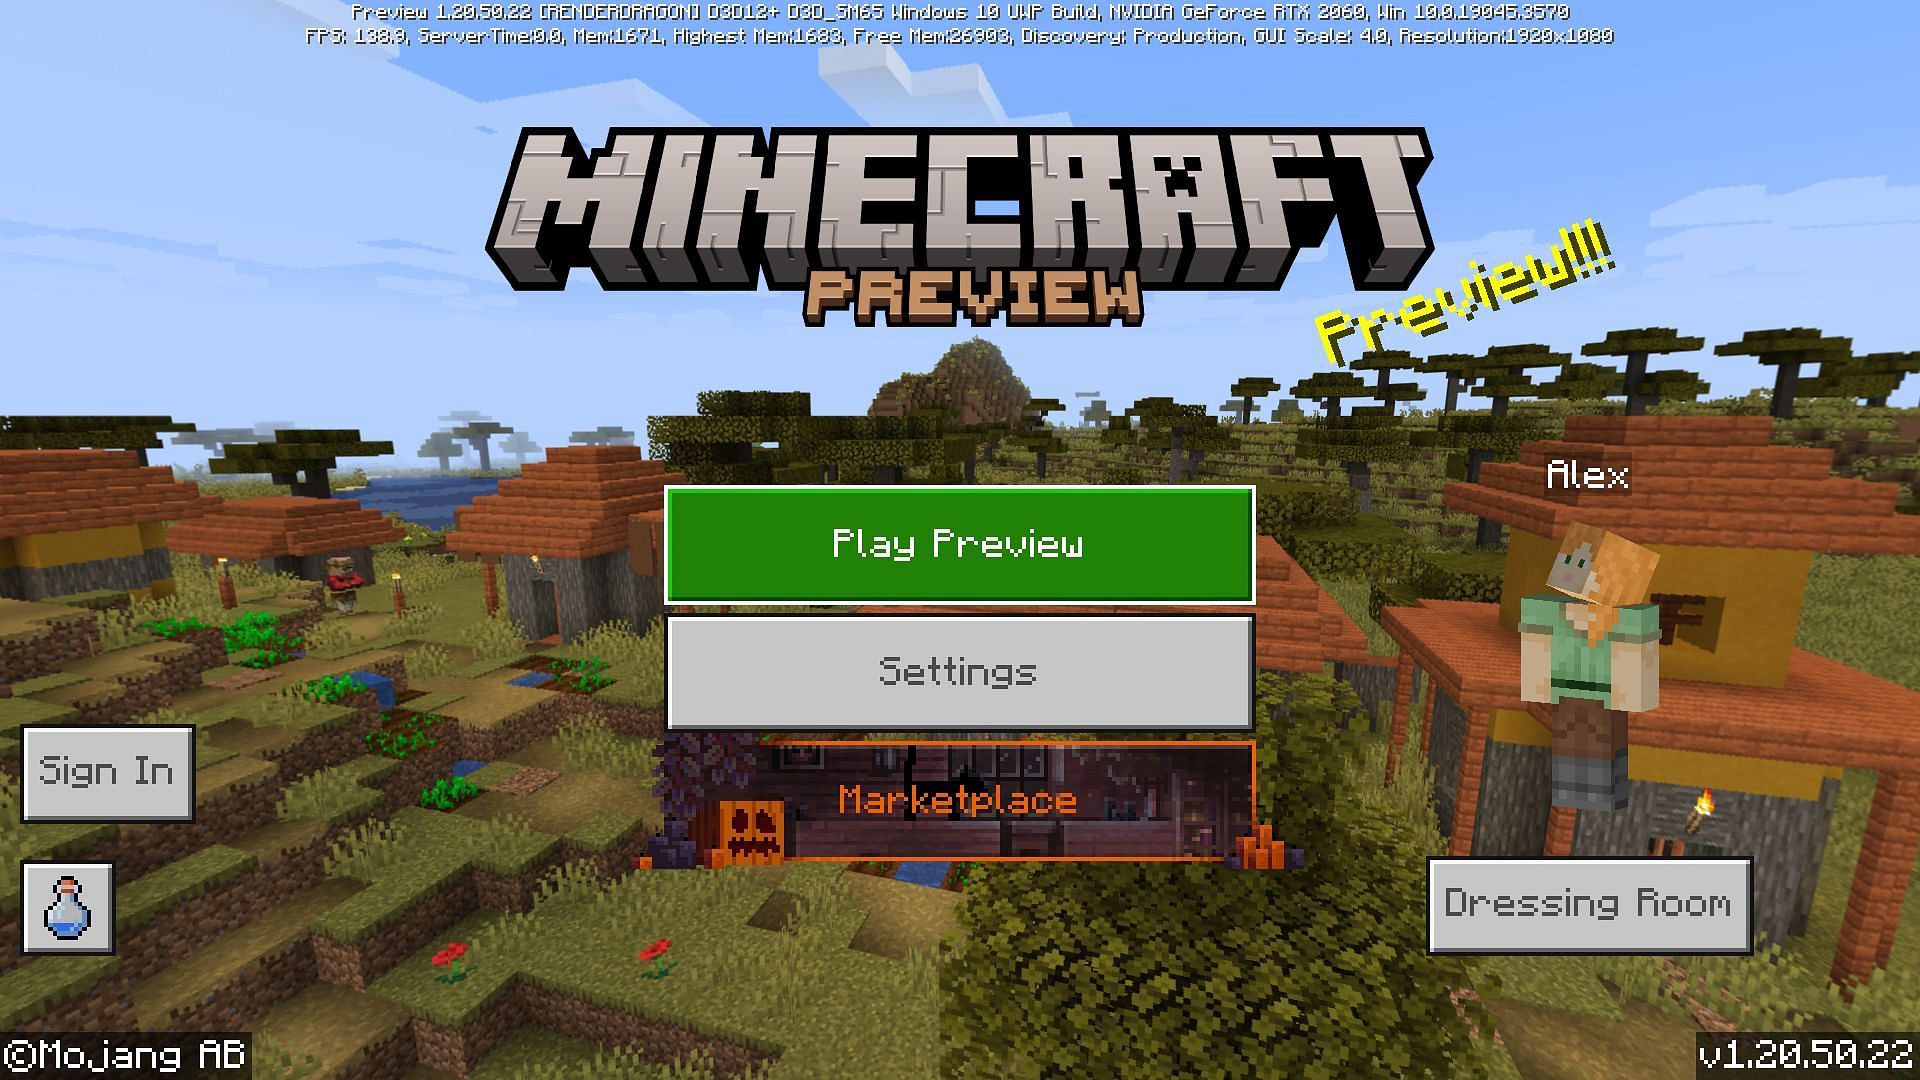 How to download Minecraft Bedrock 2.70 update on PlayStation?